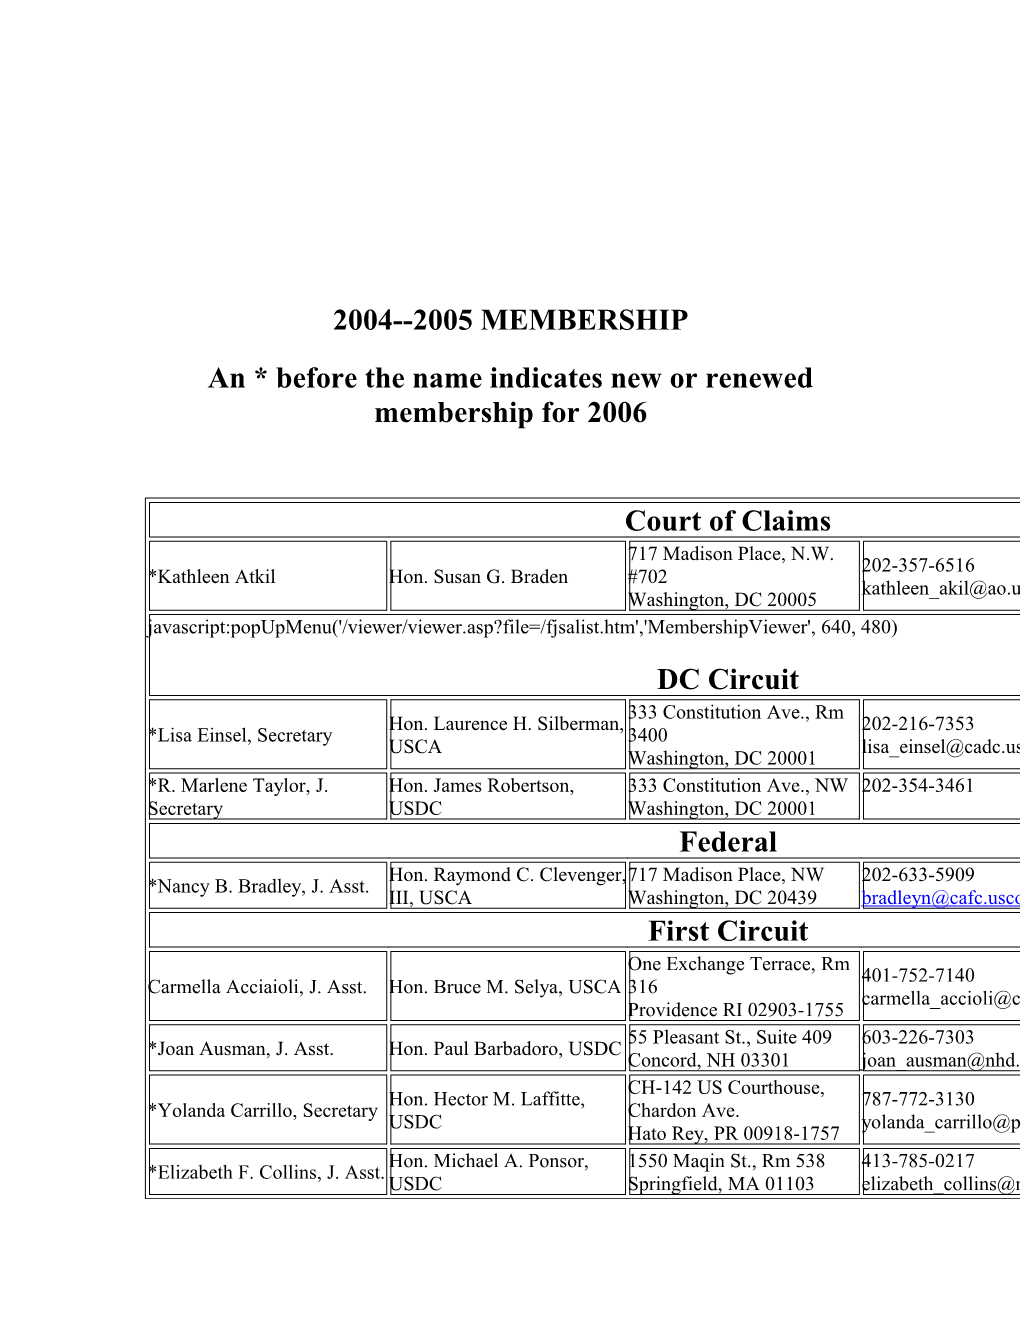 An * Before the Name Indicates New Or Renewed Membership for 2006